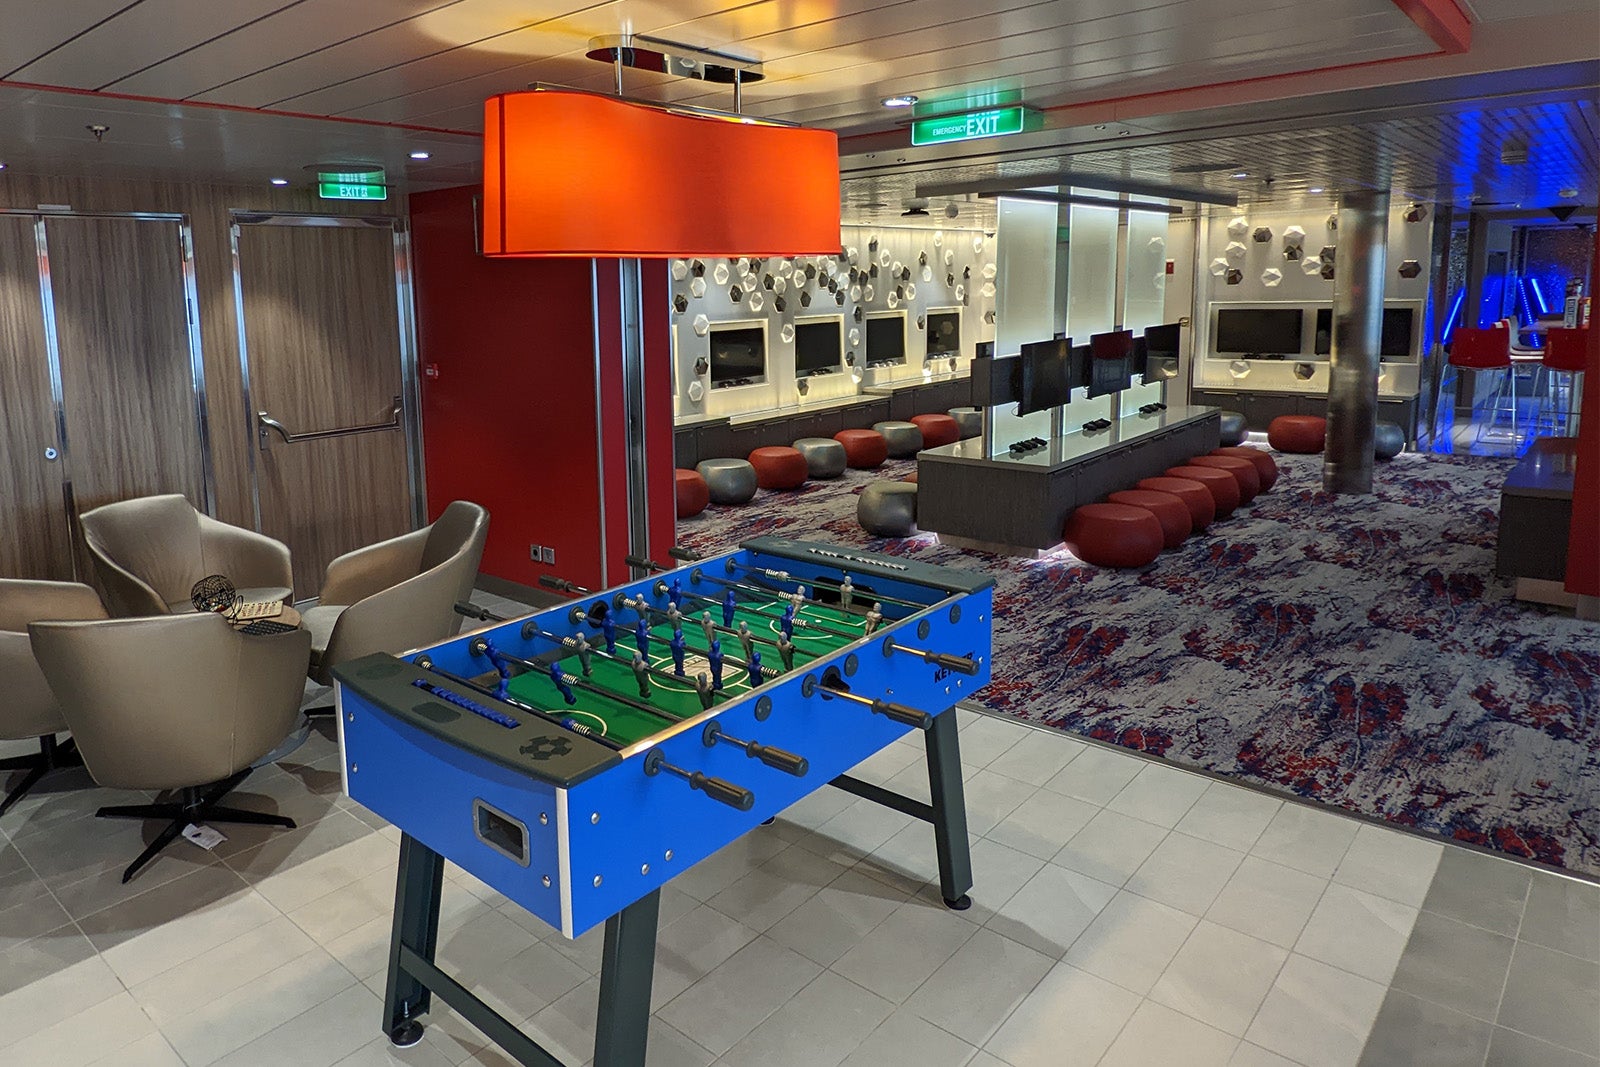 Cruise ship teen club with foosball table and video games